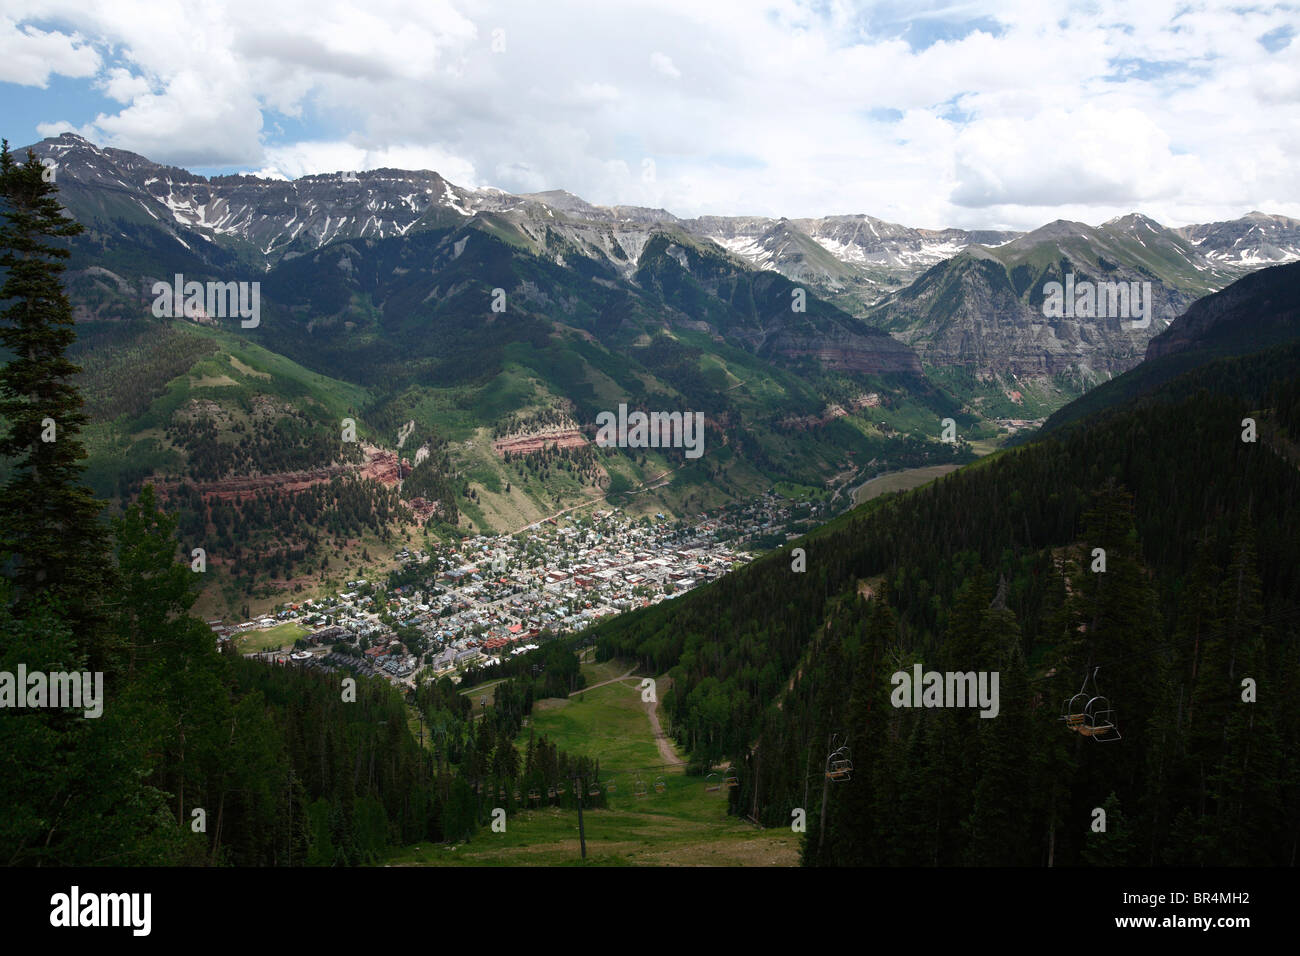 Scenic view of downtown Telluride nestled in the mountains as seen from atop the tram station atop the ski mountain. Stock Photo